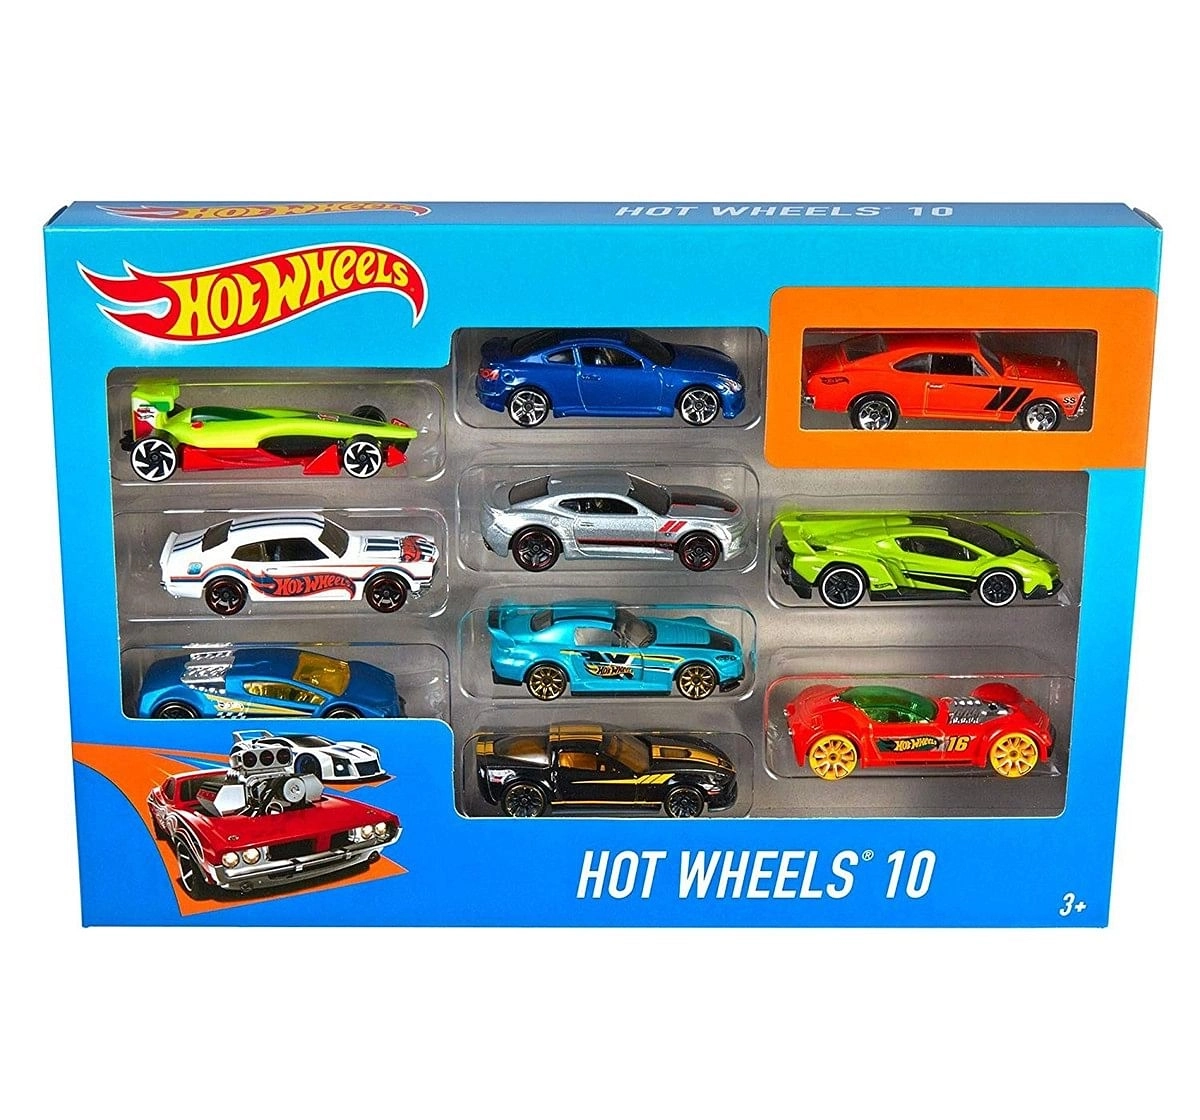 Hot Wheels Die Cast Cars Pack of 10 Vehicles for Kids age 3Y+, Assorted